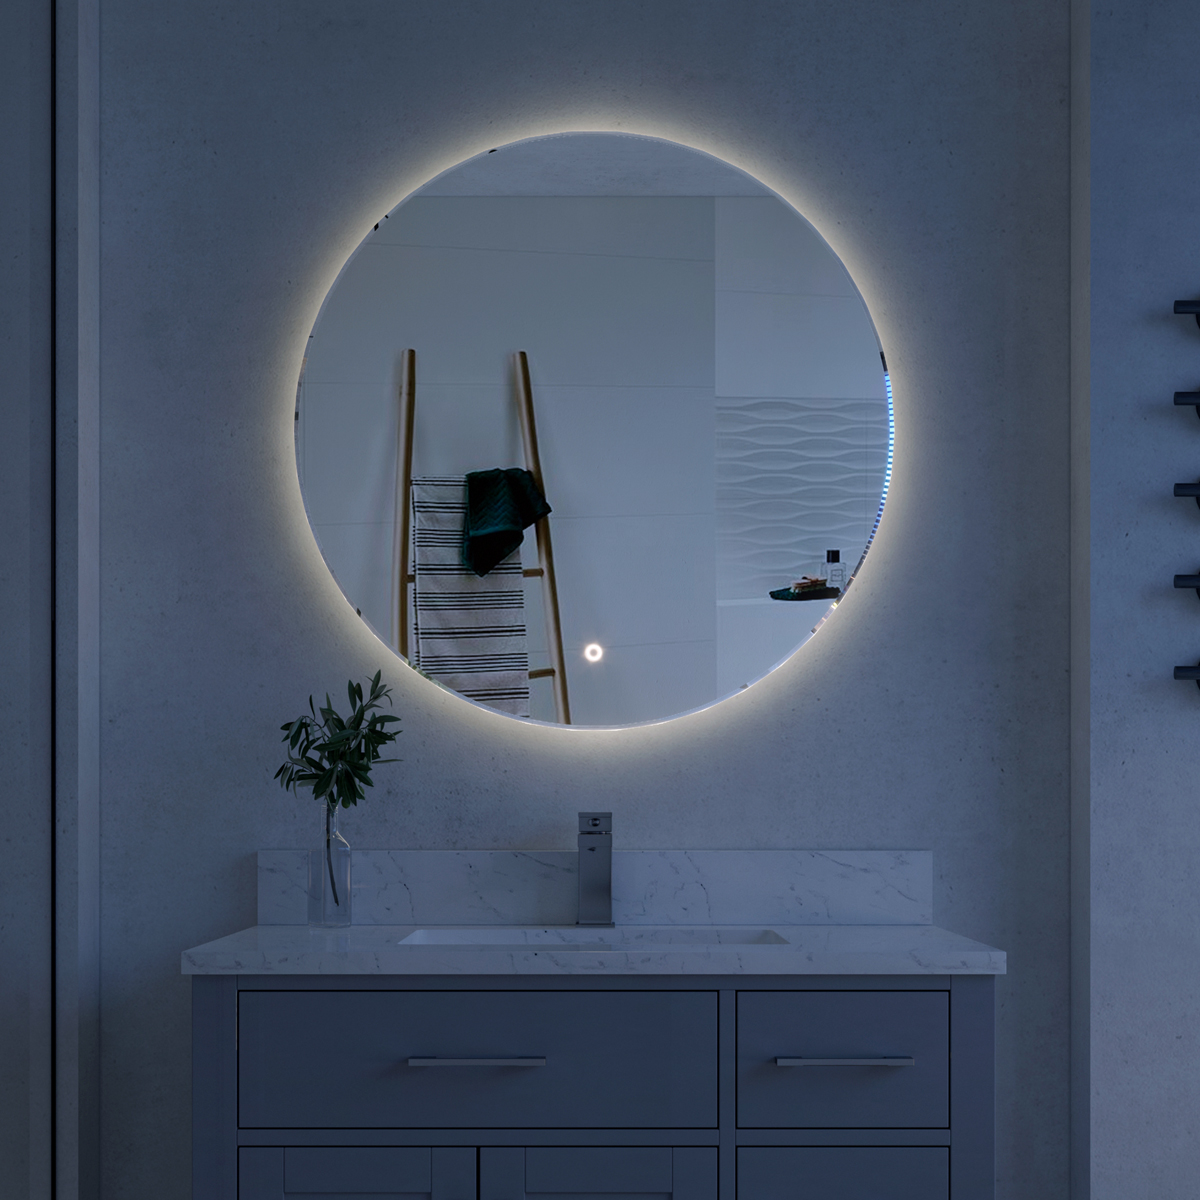 Duko MA05R32T Wall Mounted Makeup LED Bathroom Vanity Mirror with Anti-Fog and Bluetooth Options